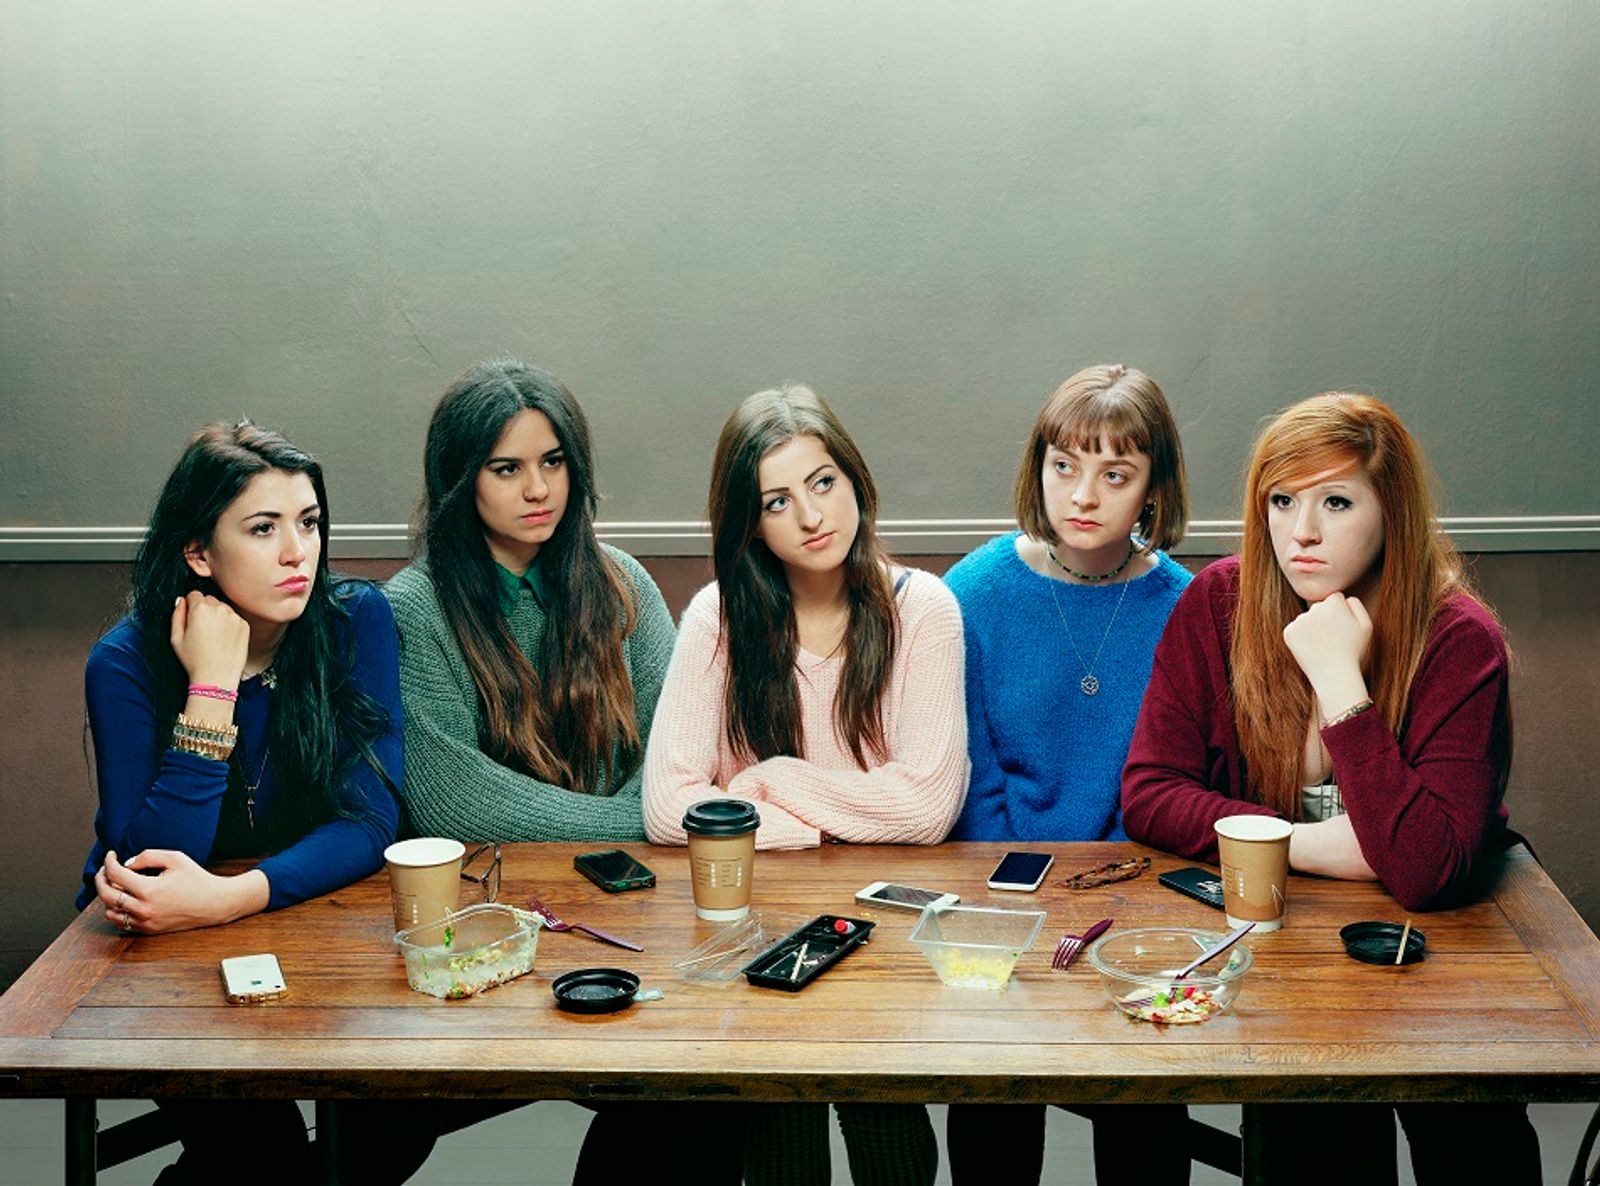 © David Stewart, Five Girls 2014. (Winner of the 2015 Taylor Wessing Photographic Portrait Prize)